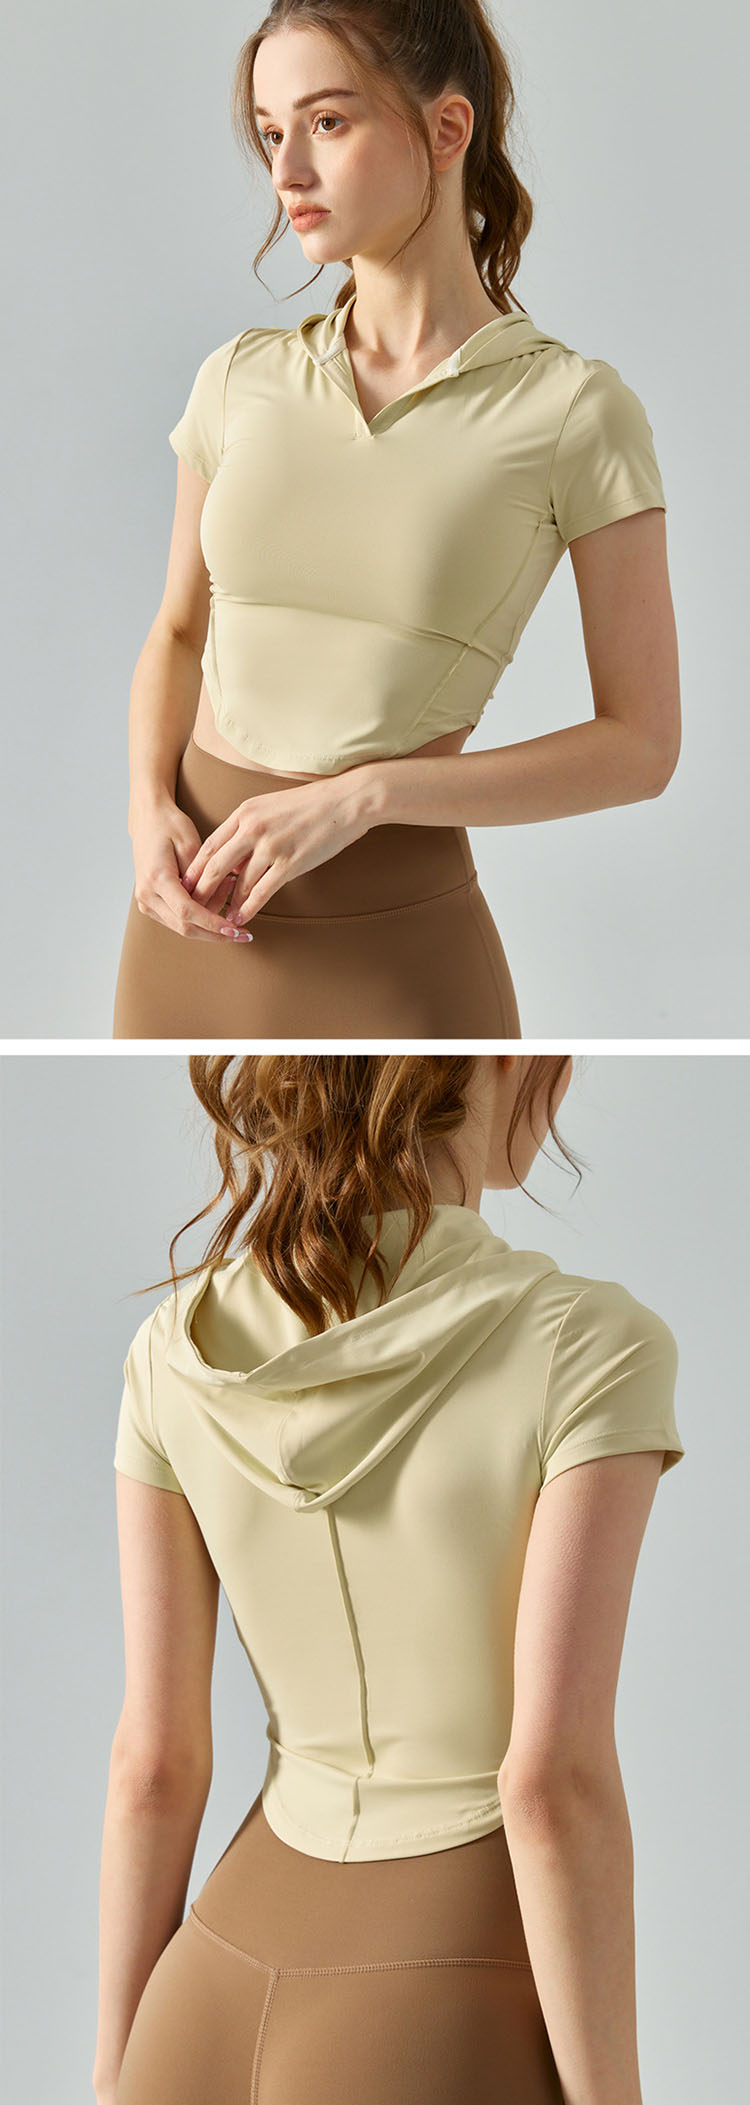 Circular hem design is adopted to cover the abdominal fat and modify the waist line